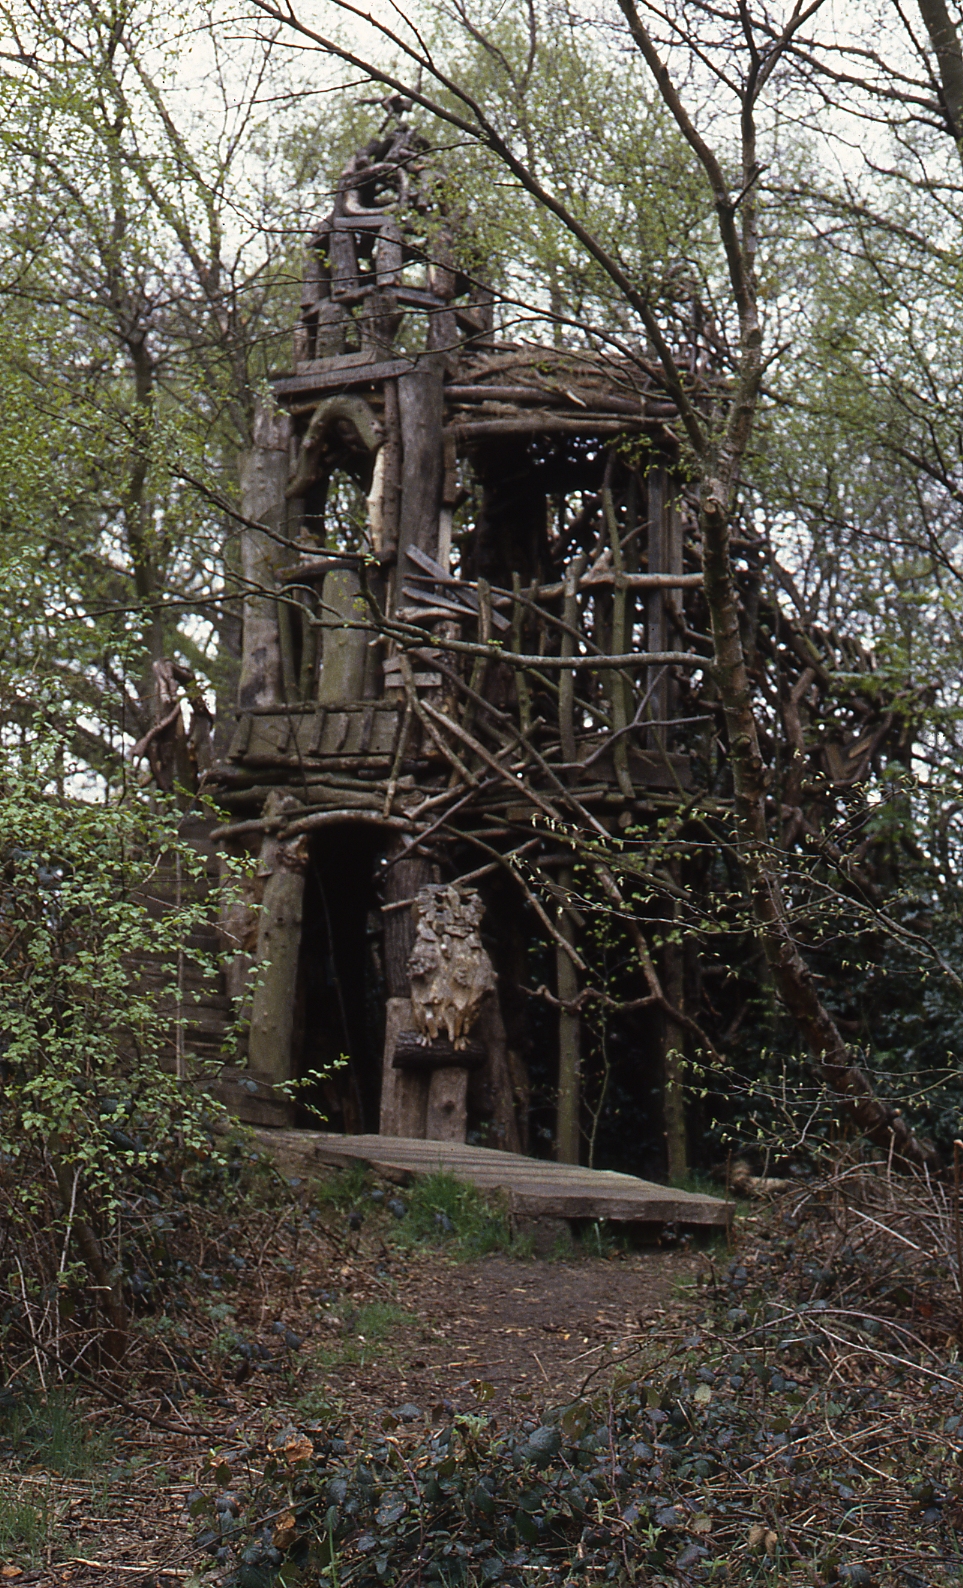 Outsider Environments Europe: Ben Wilson, Wooden structures and decorated  chewing gum